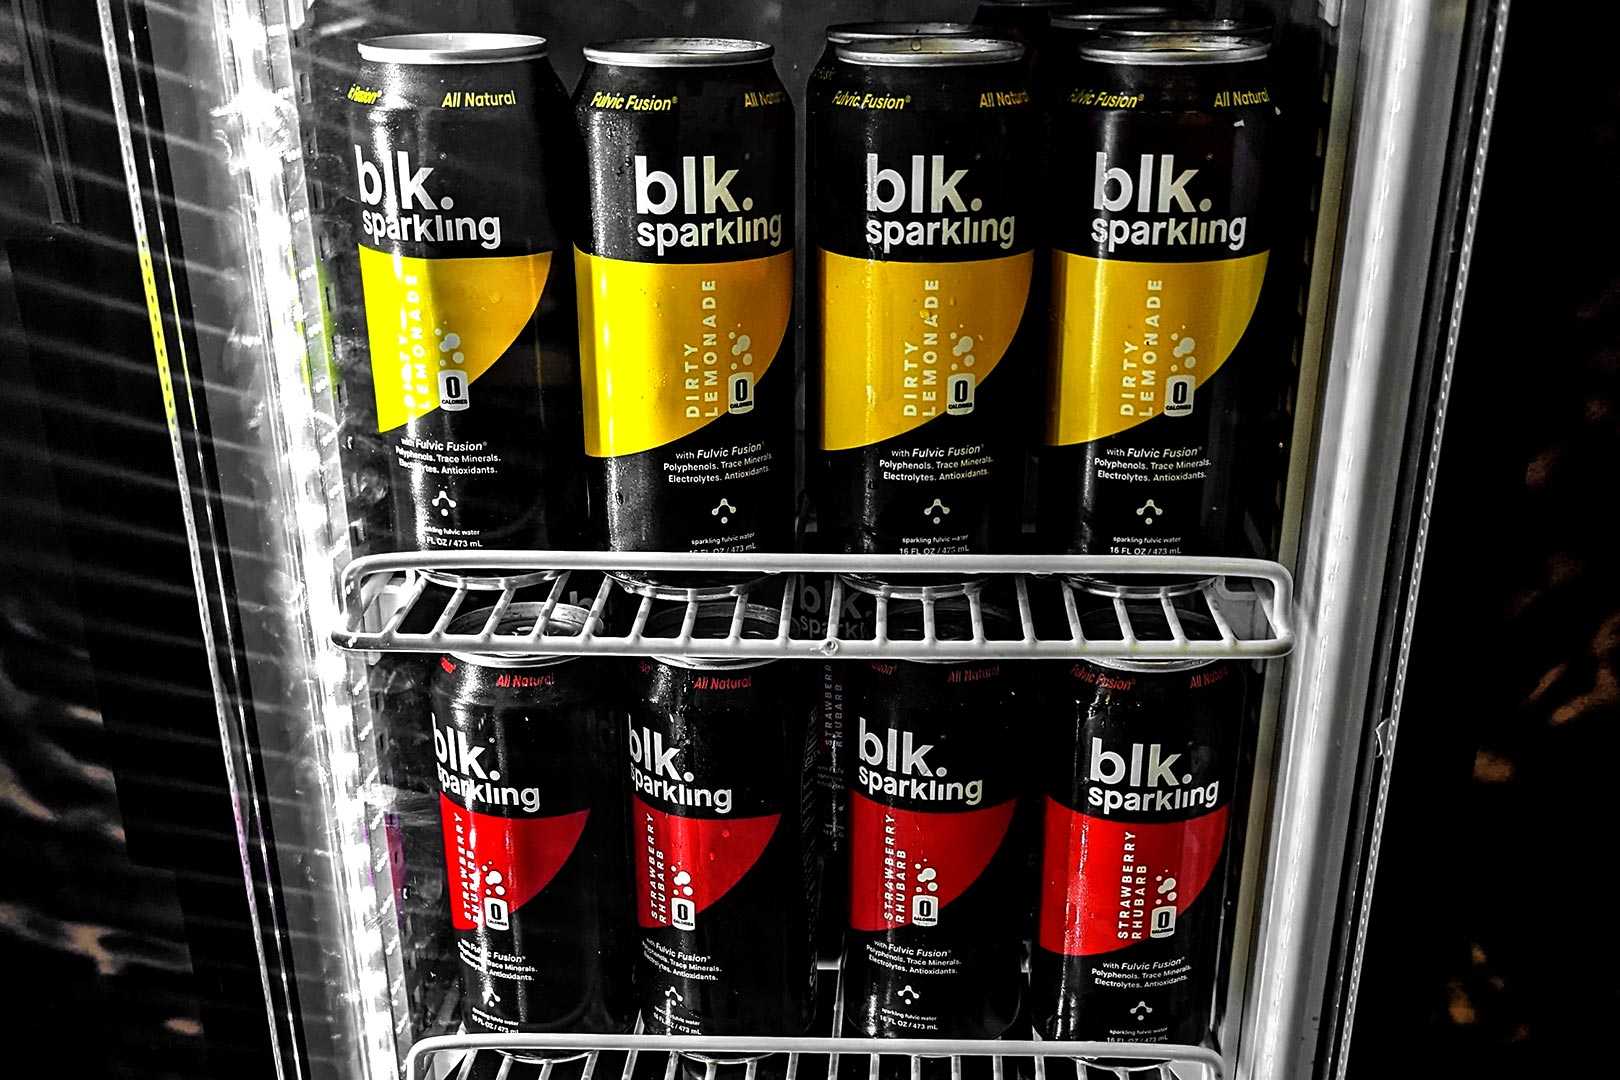 Blk Sparkling And Blk Canned Water